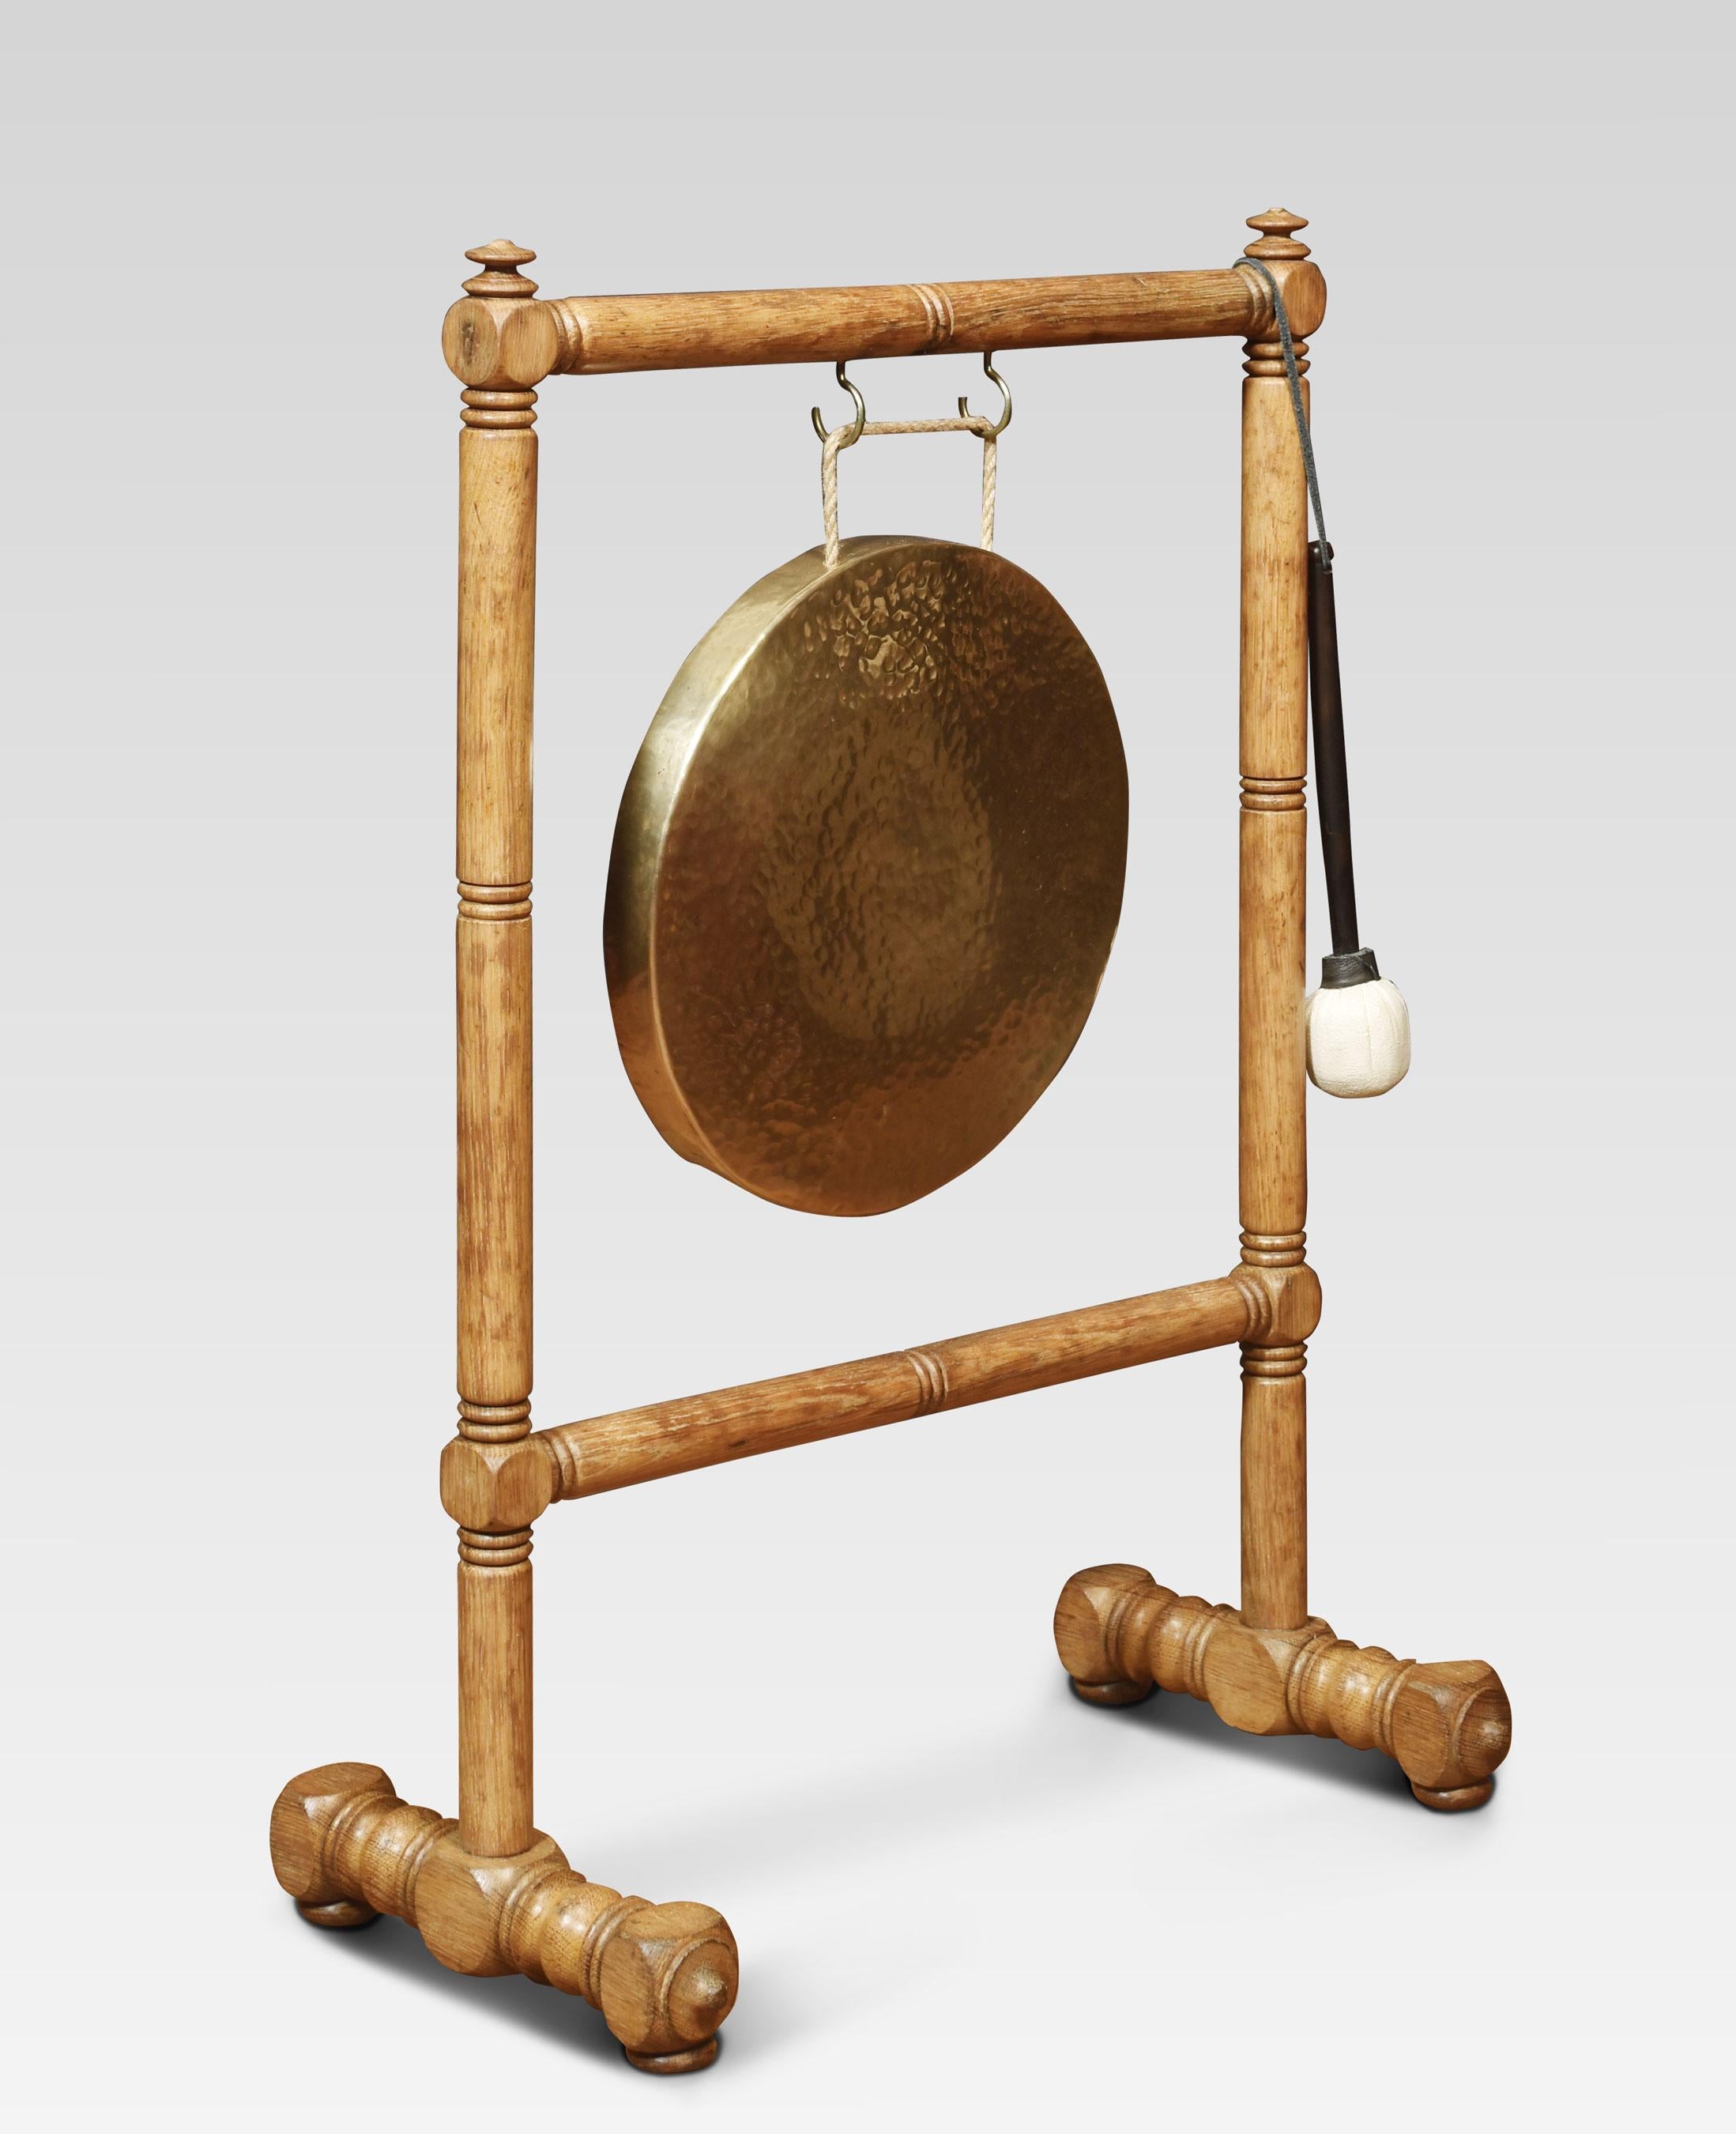 Oak framed brass dinner gong and beater, the stand having turned upright supports suspending the original brass gong to centre raised up on platform base.
Dimensions
Height 37 Inches
Width 26.5 Inches
Depth 14 Inches